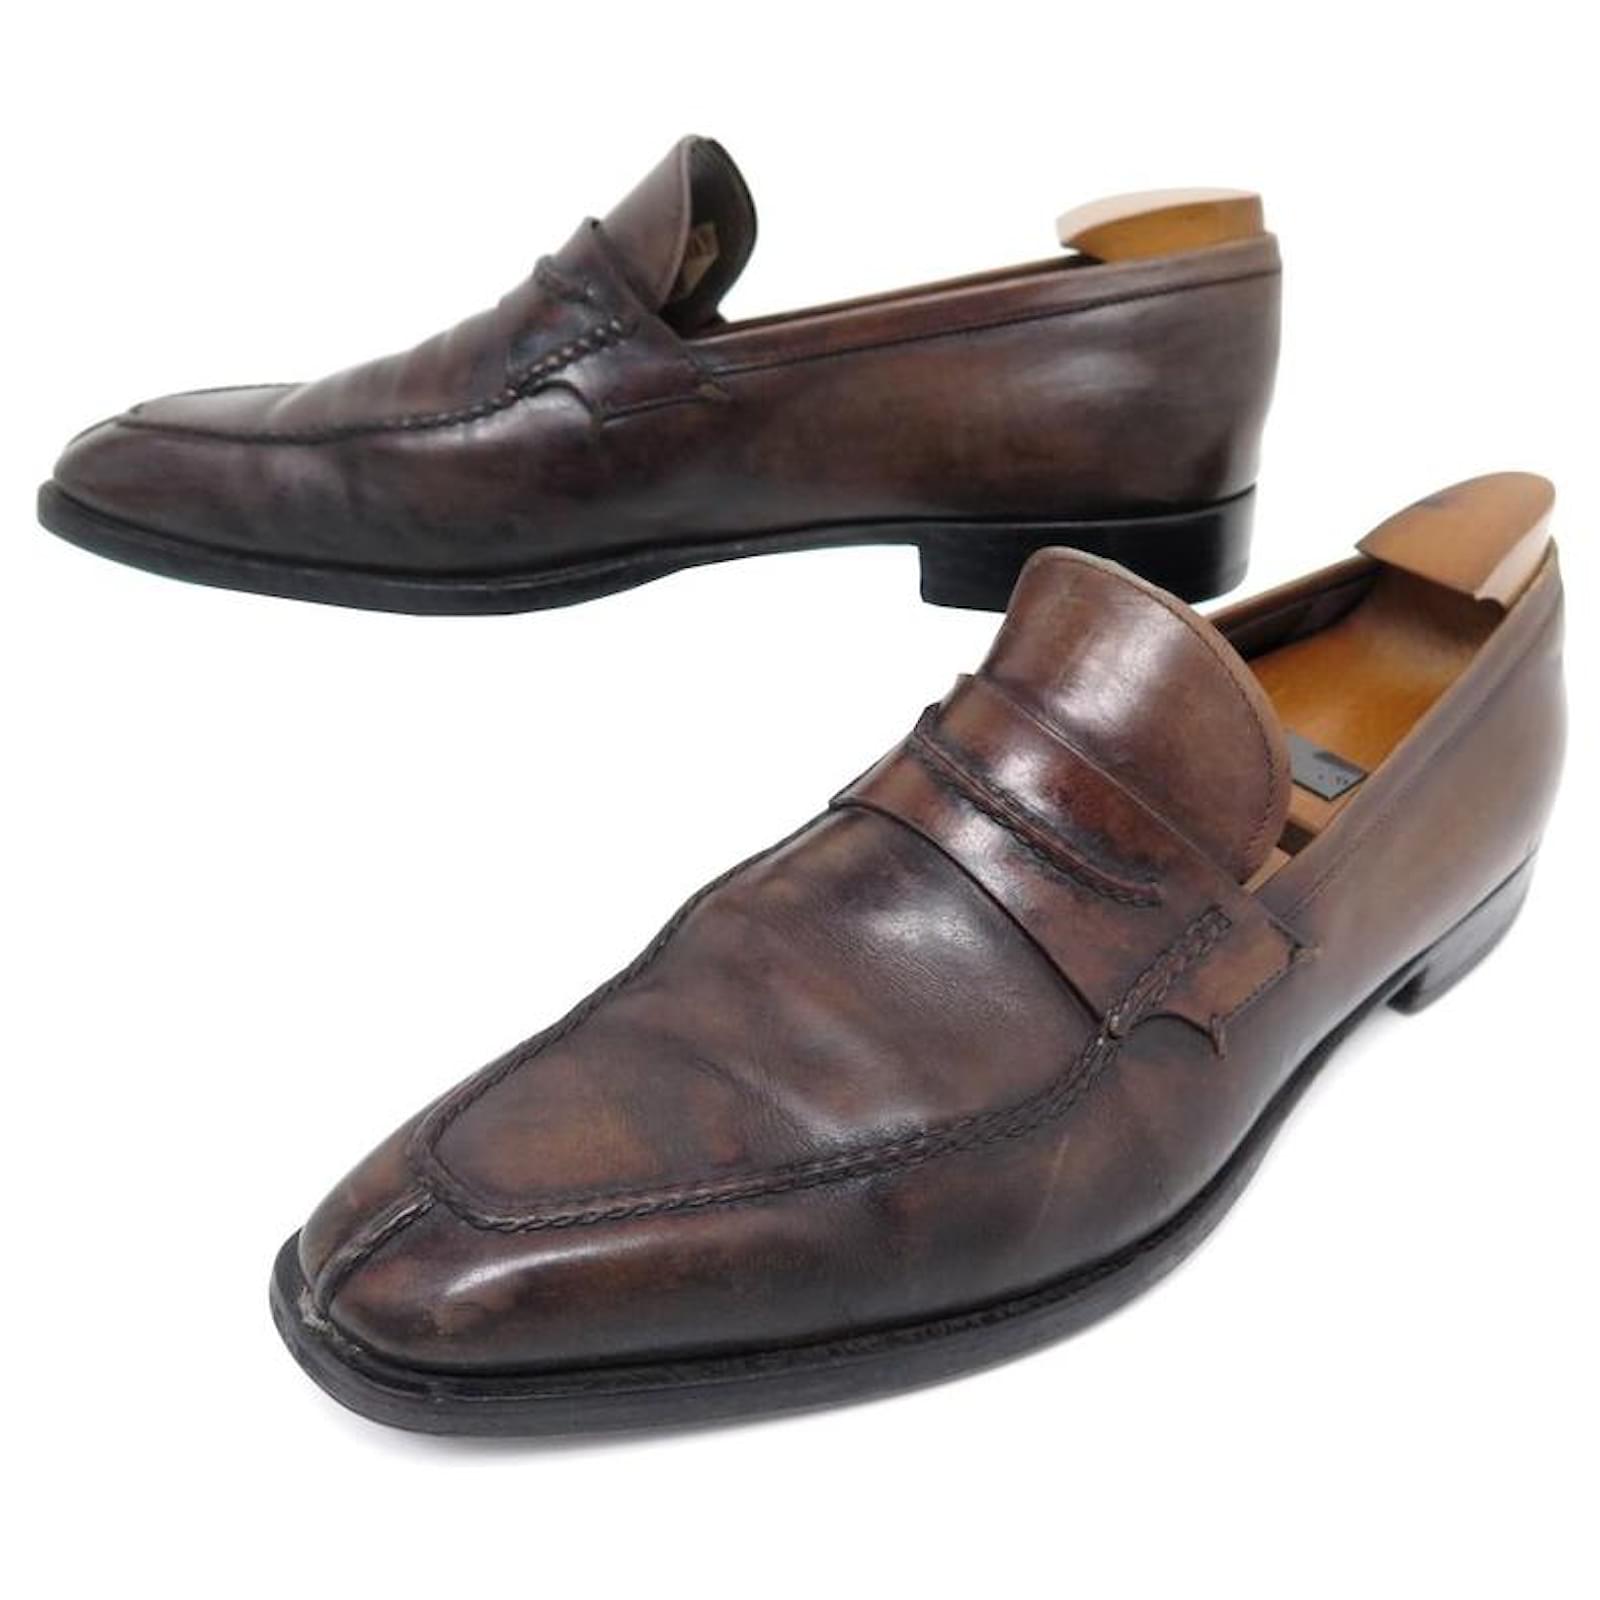 BERLUTI SHOES ANDY DEMESURE LOAFERS 9 43 PATINA BROWN LEATHER